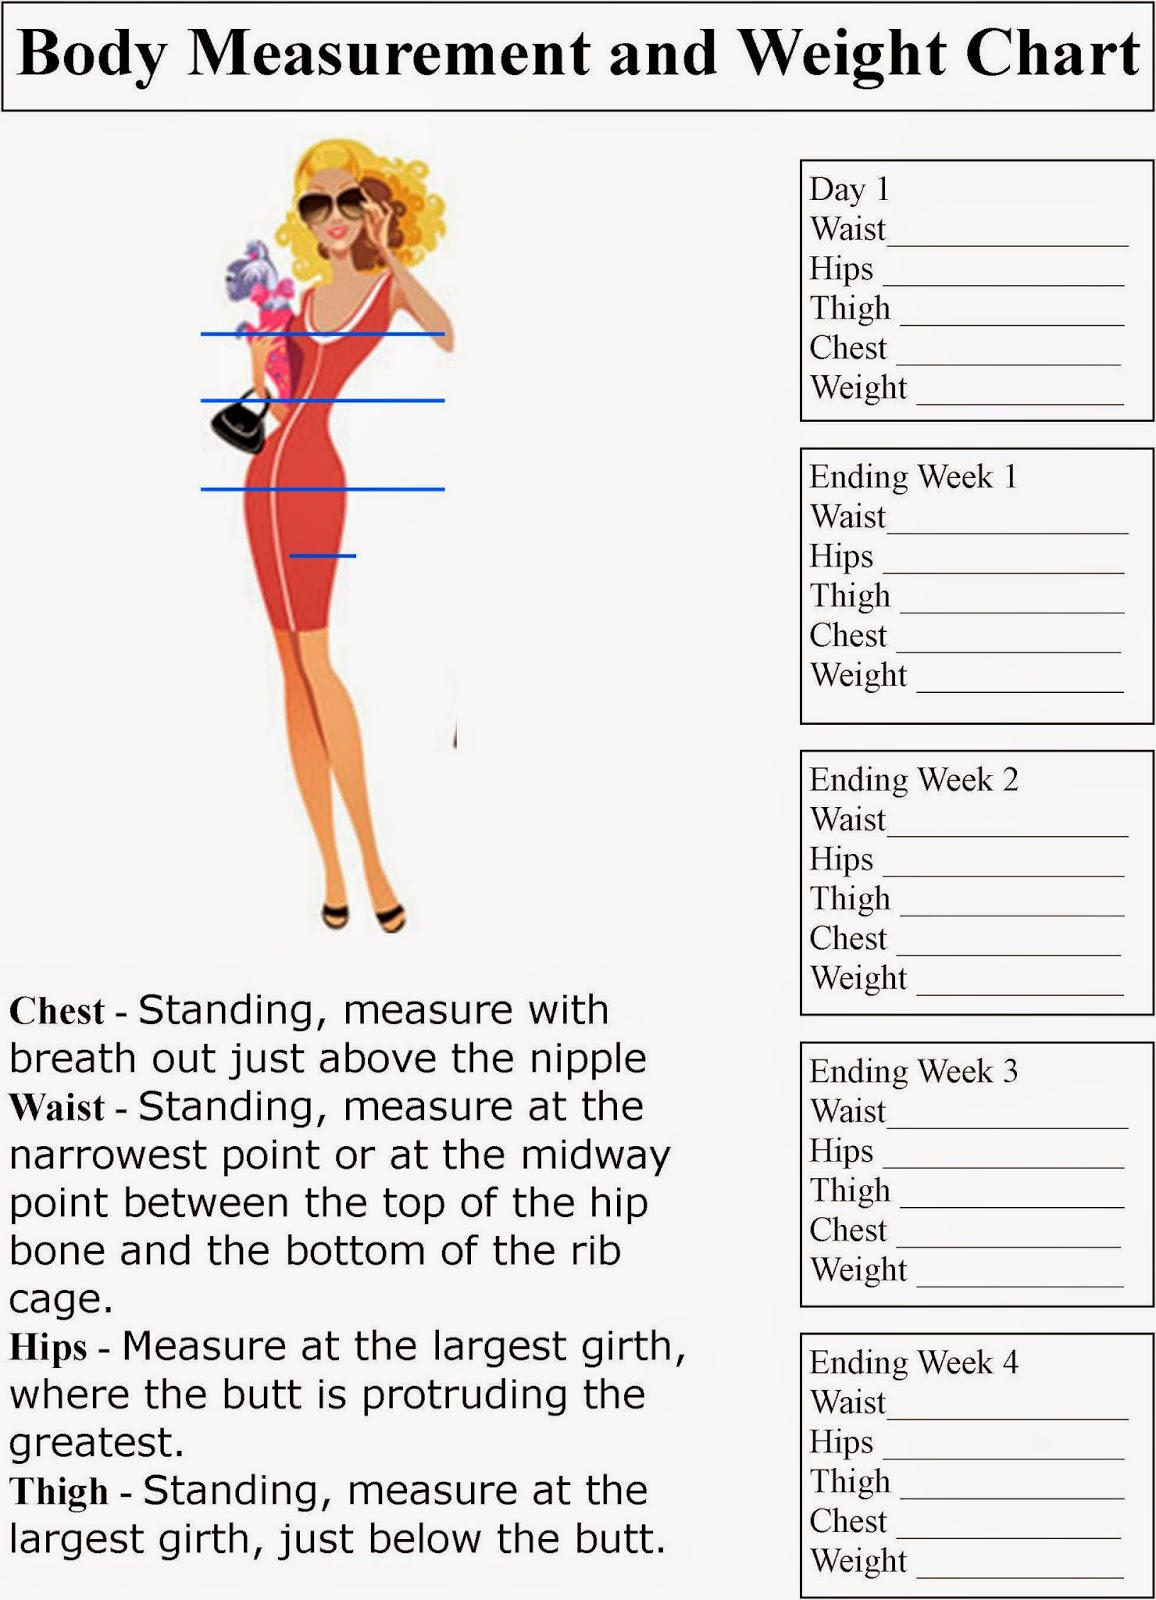 Muffins vs. Muffintop Body Measurement and Weight Chart 2